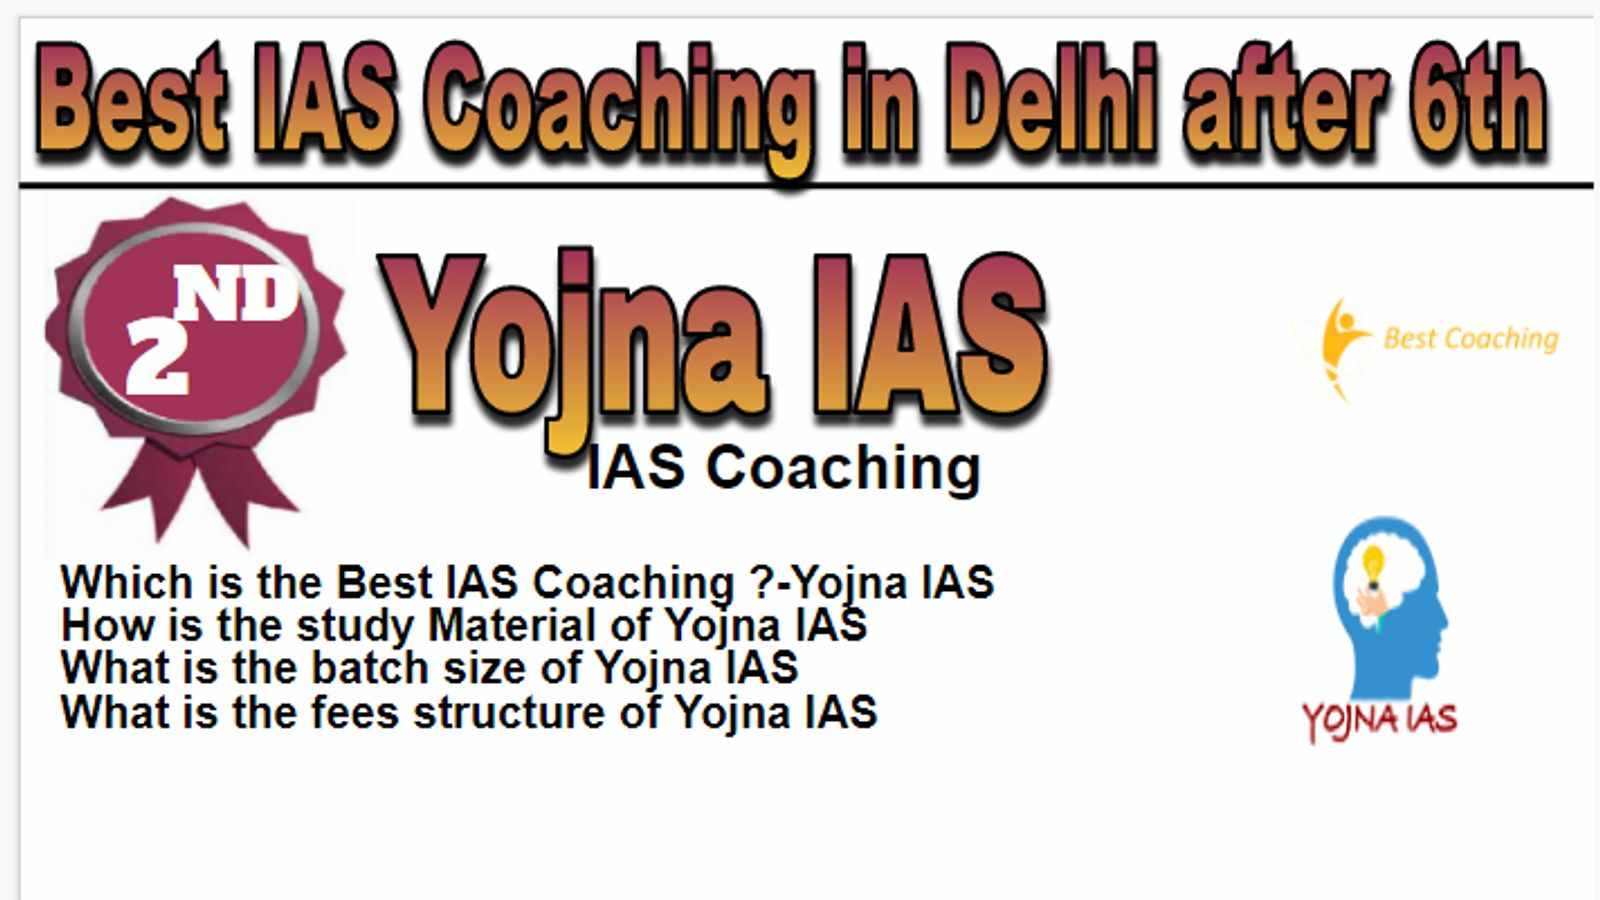 Rank 2 Best IAS coaching in Delhi after 6th